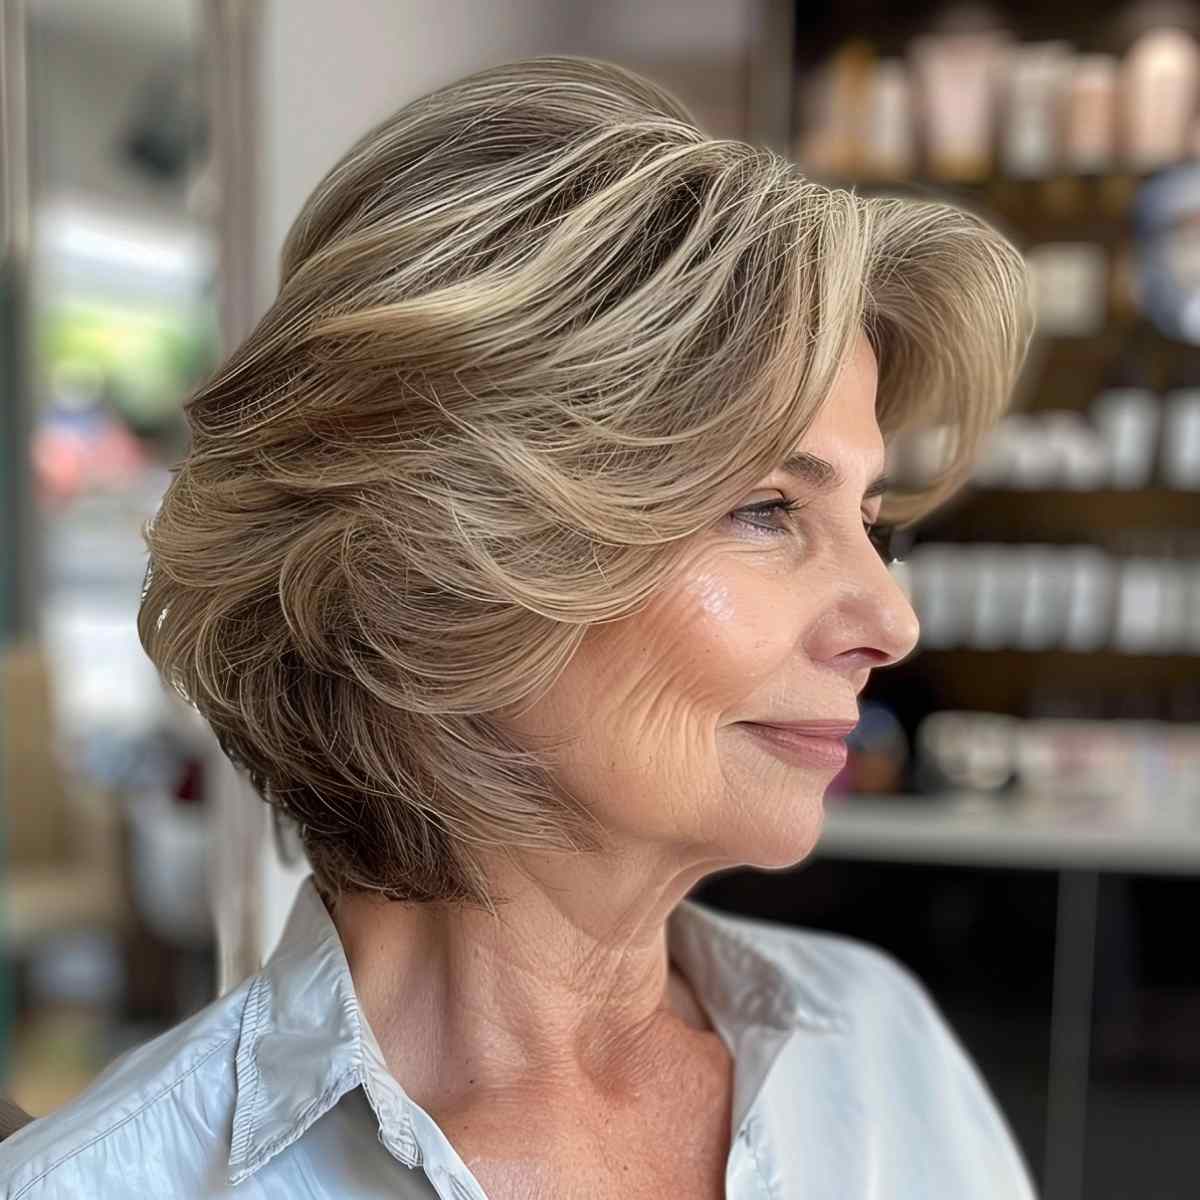 Textured wedge cut for women in their 60s